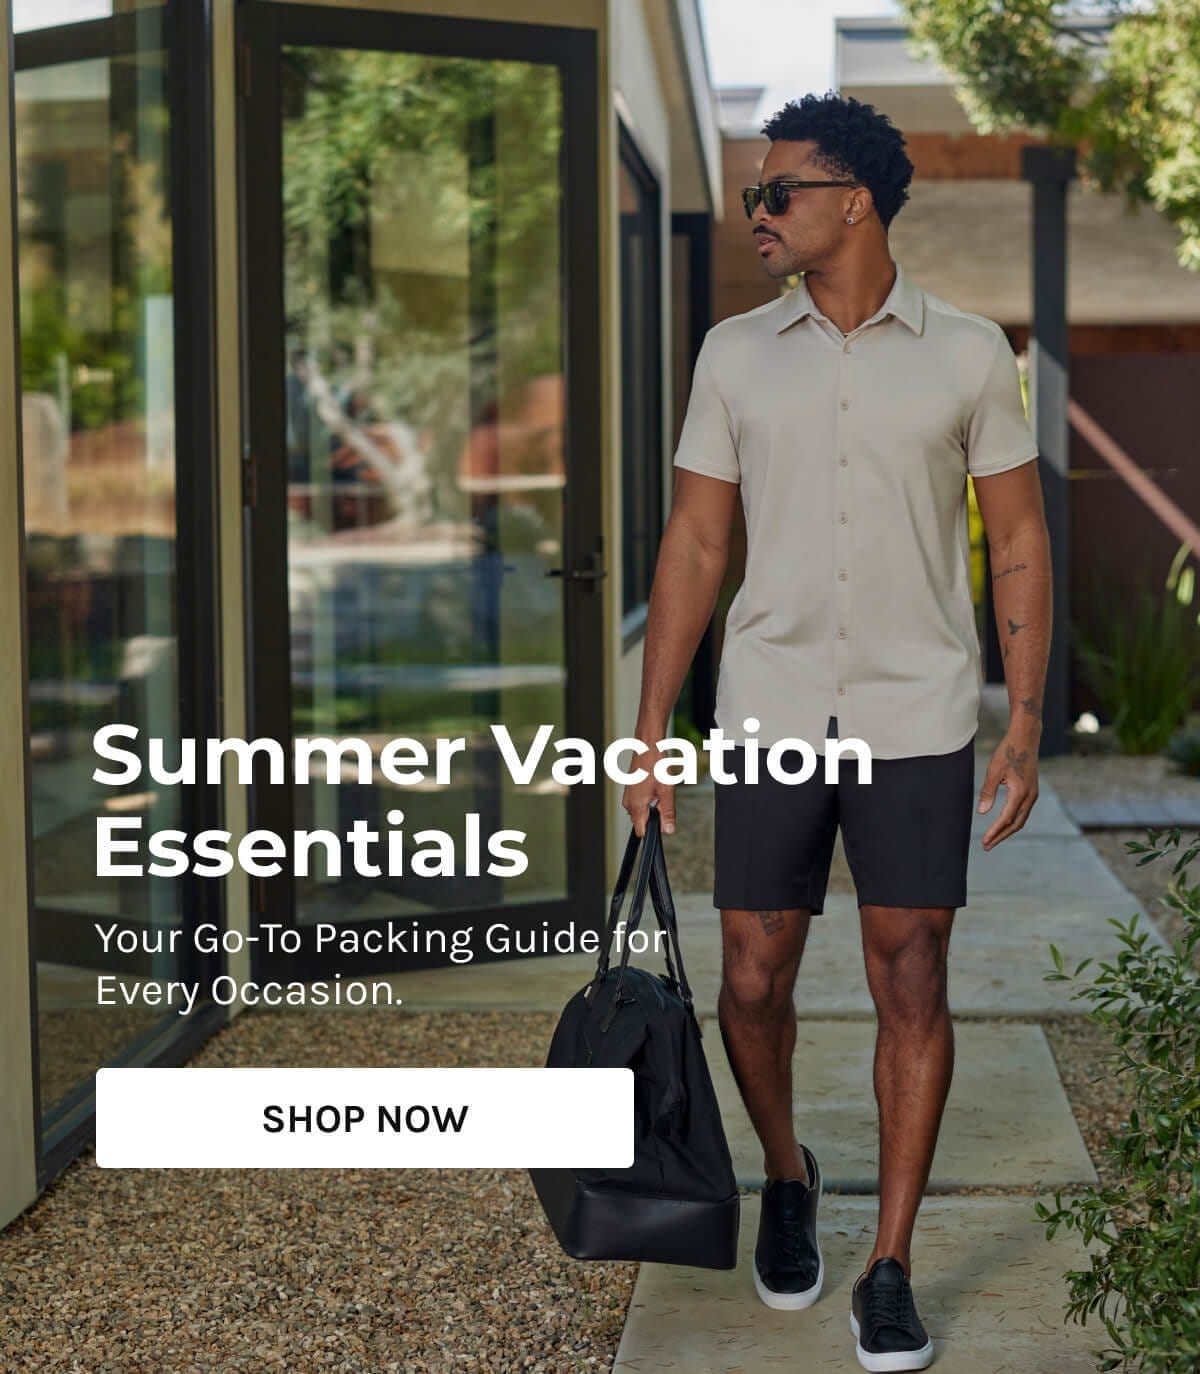 Summer Vacation Essentials - Your go-to packing guide